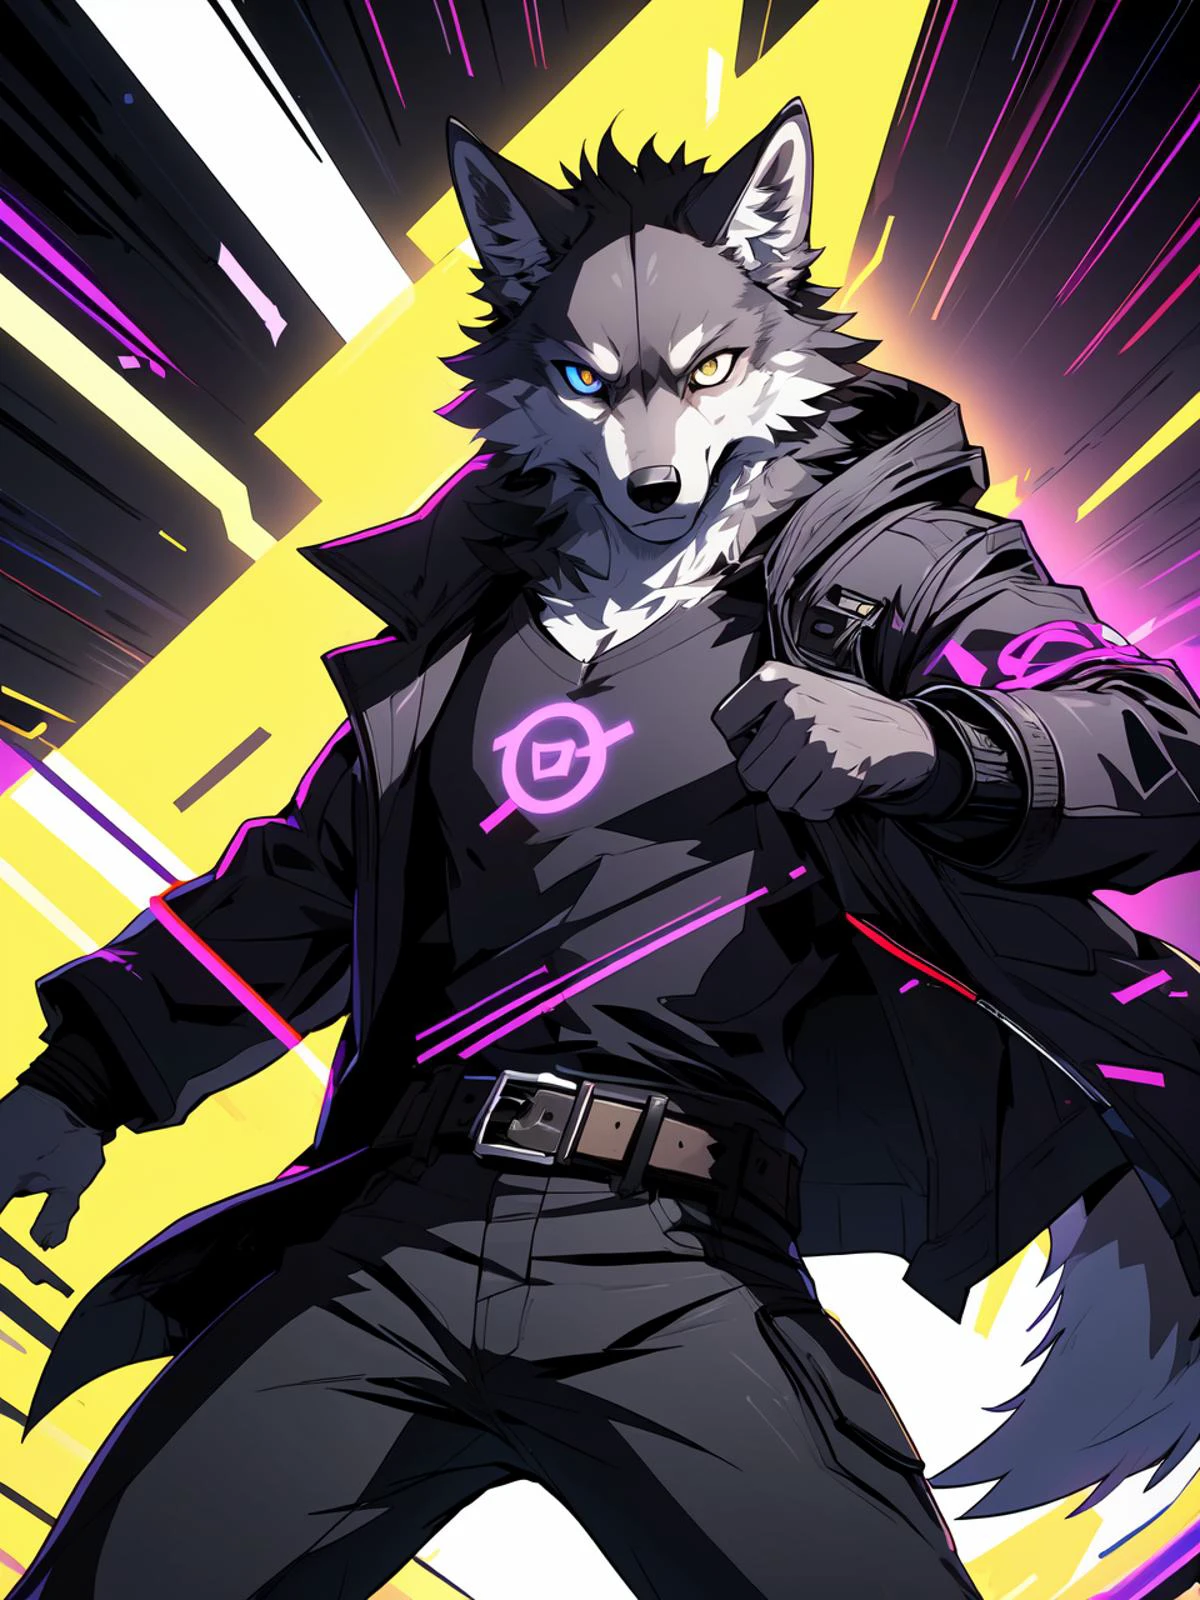 masterpiece, game poster, anime, 2d, illustration, digital media,
musuclar male, solo, wolf, canid, black pupils, 
cyberpunk, coat, black pants, belt,
glitch, bright eyes, detailed eyes,
yellow theme, purple theme, color contrast, fragments,
dutch angle, action pose, motion lines, icon, (symbol:1.2)